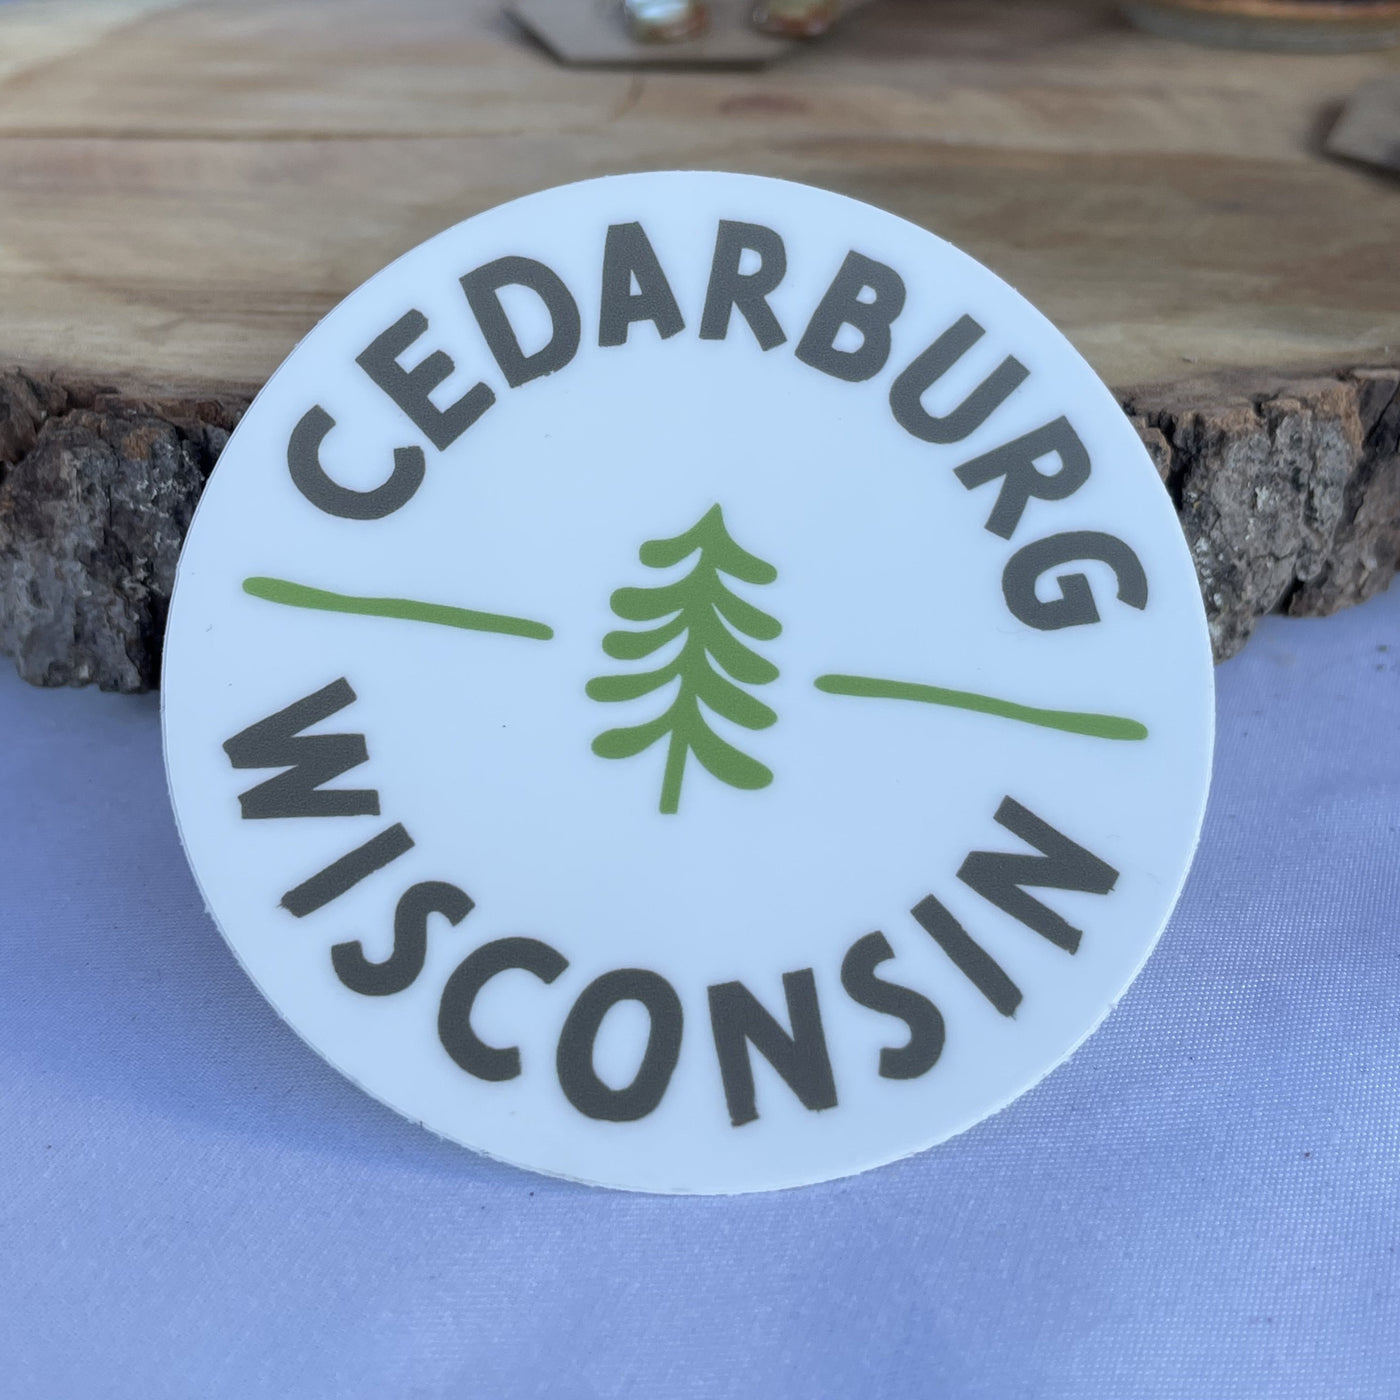 White vinyl Circle Cedarburg sticker with two color print in grey and green